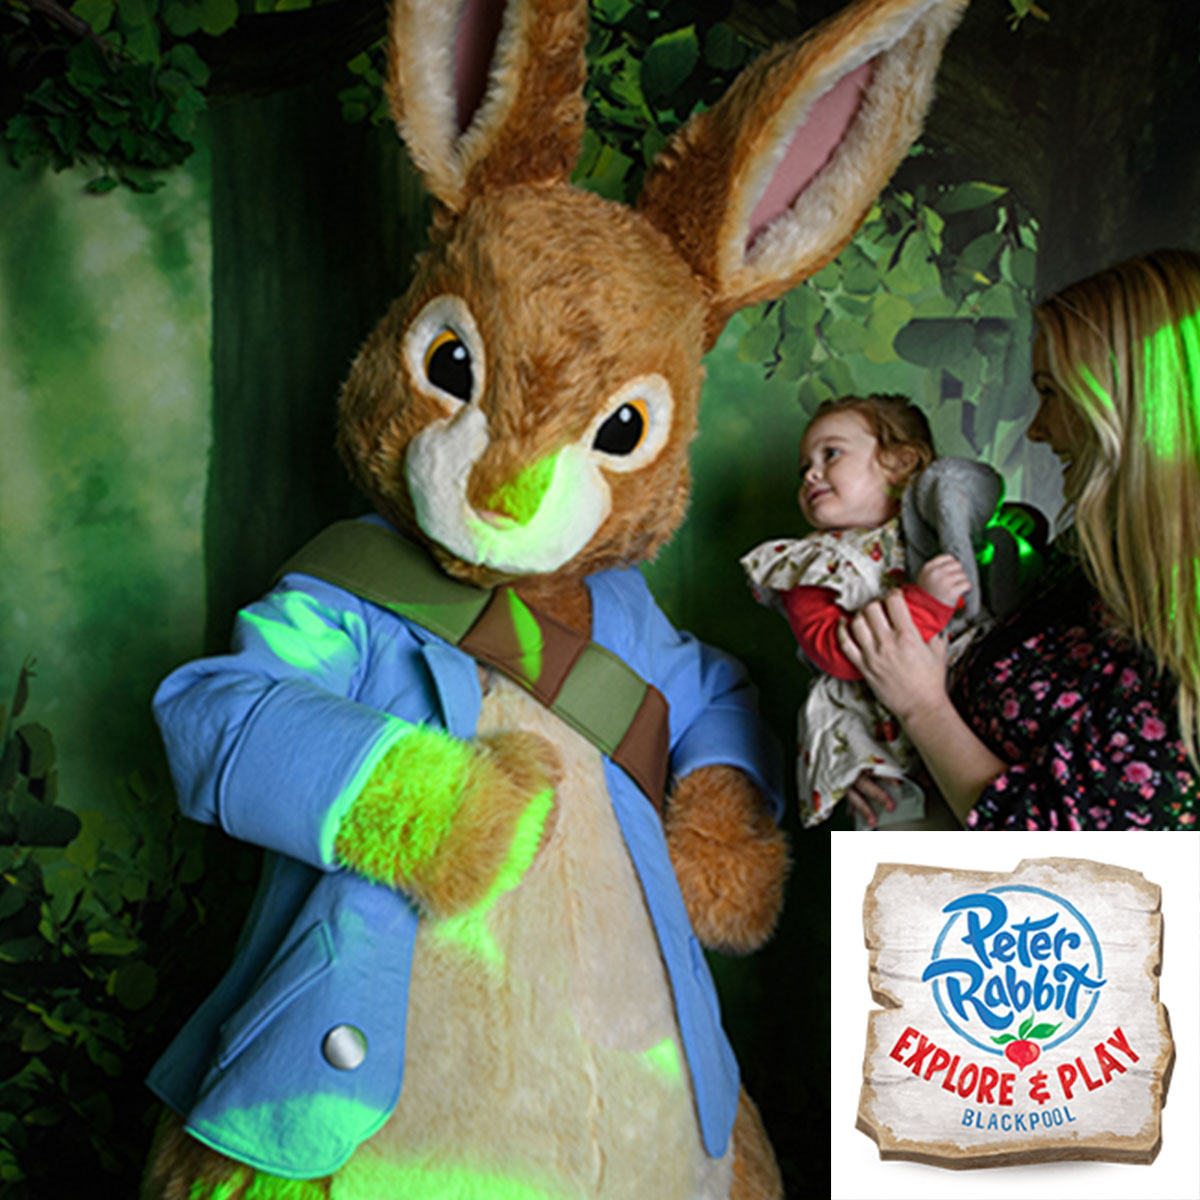 Peter Rabbit Explore & Play Blackpool Tickets, Up To 11% Off Discount